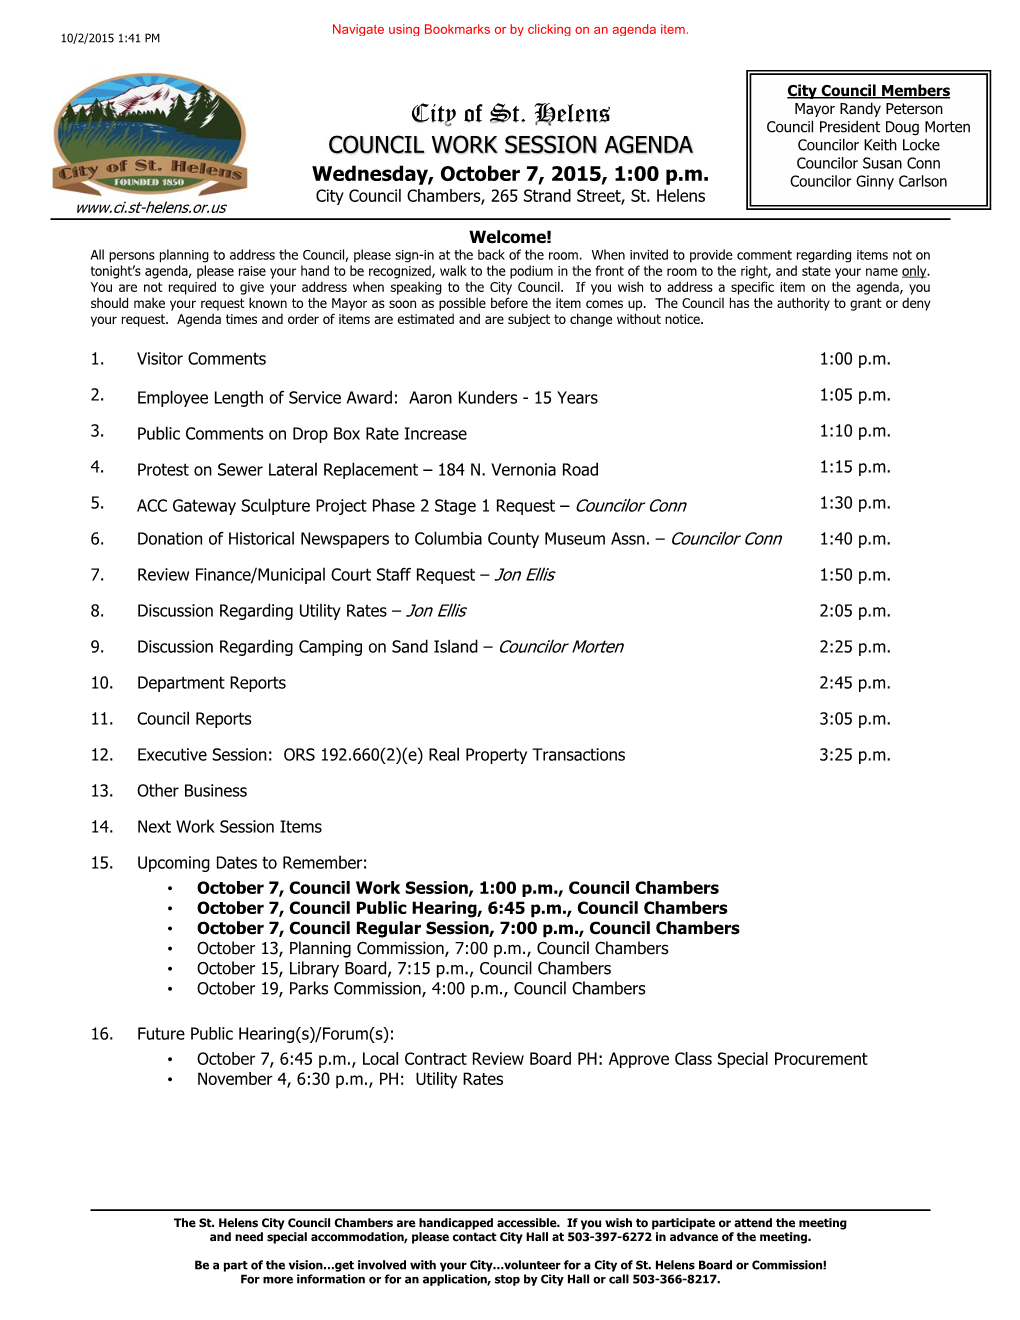 City of St. Helens Planning Department Activity Report